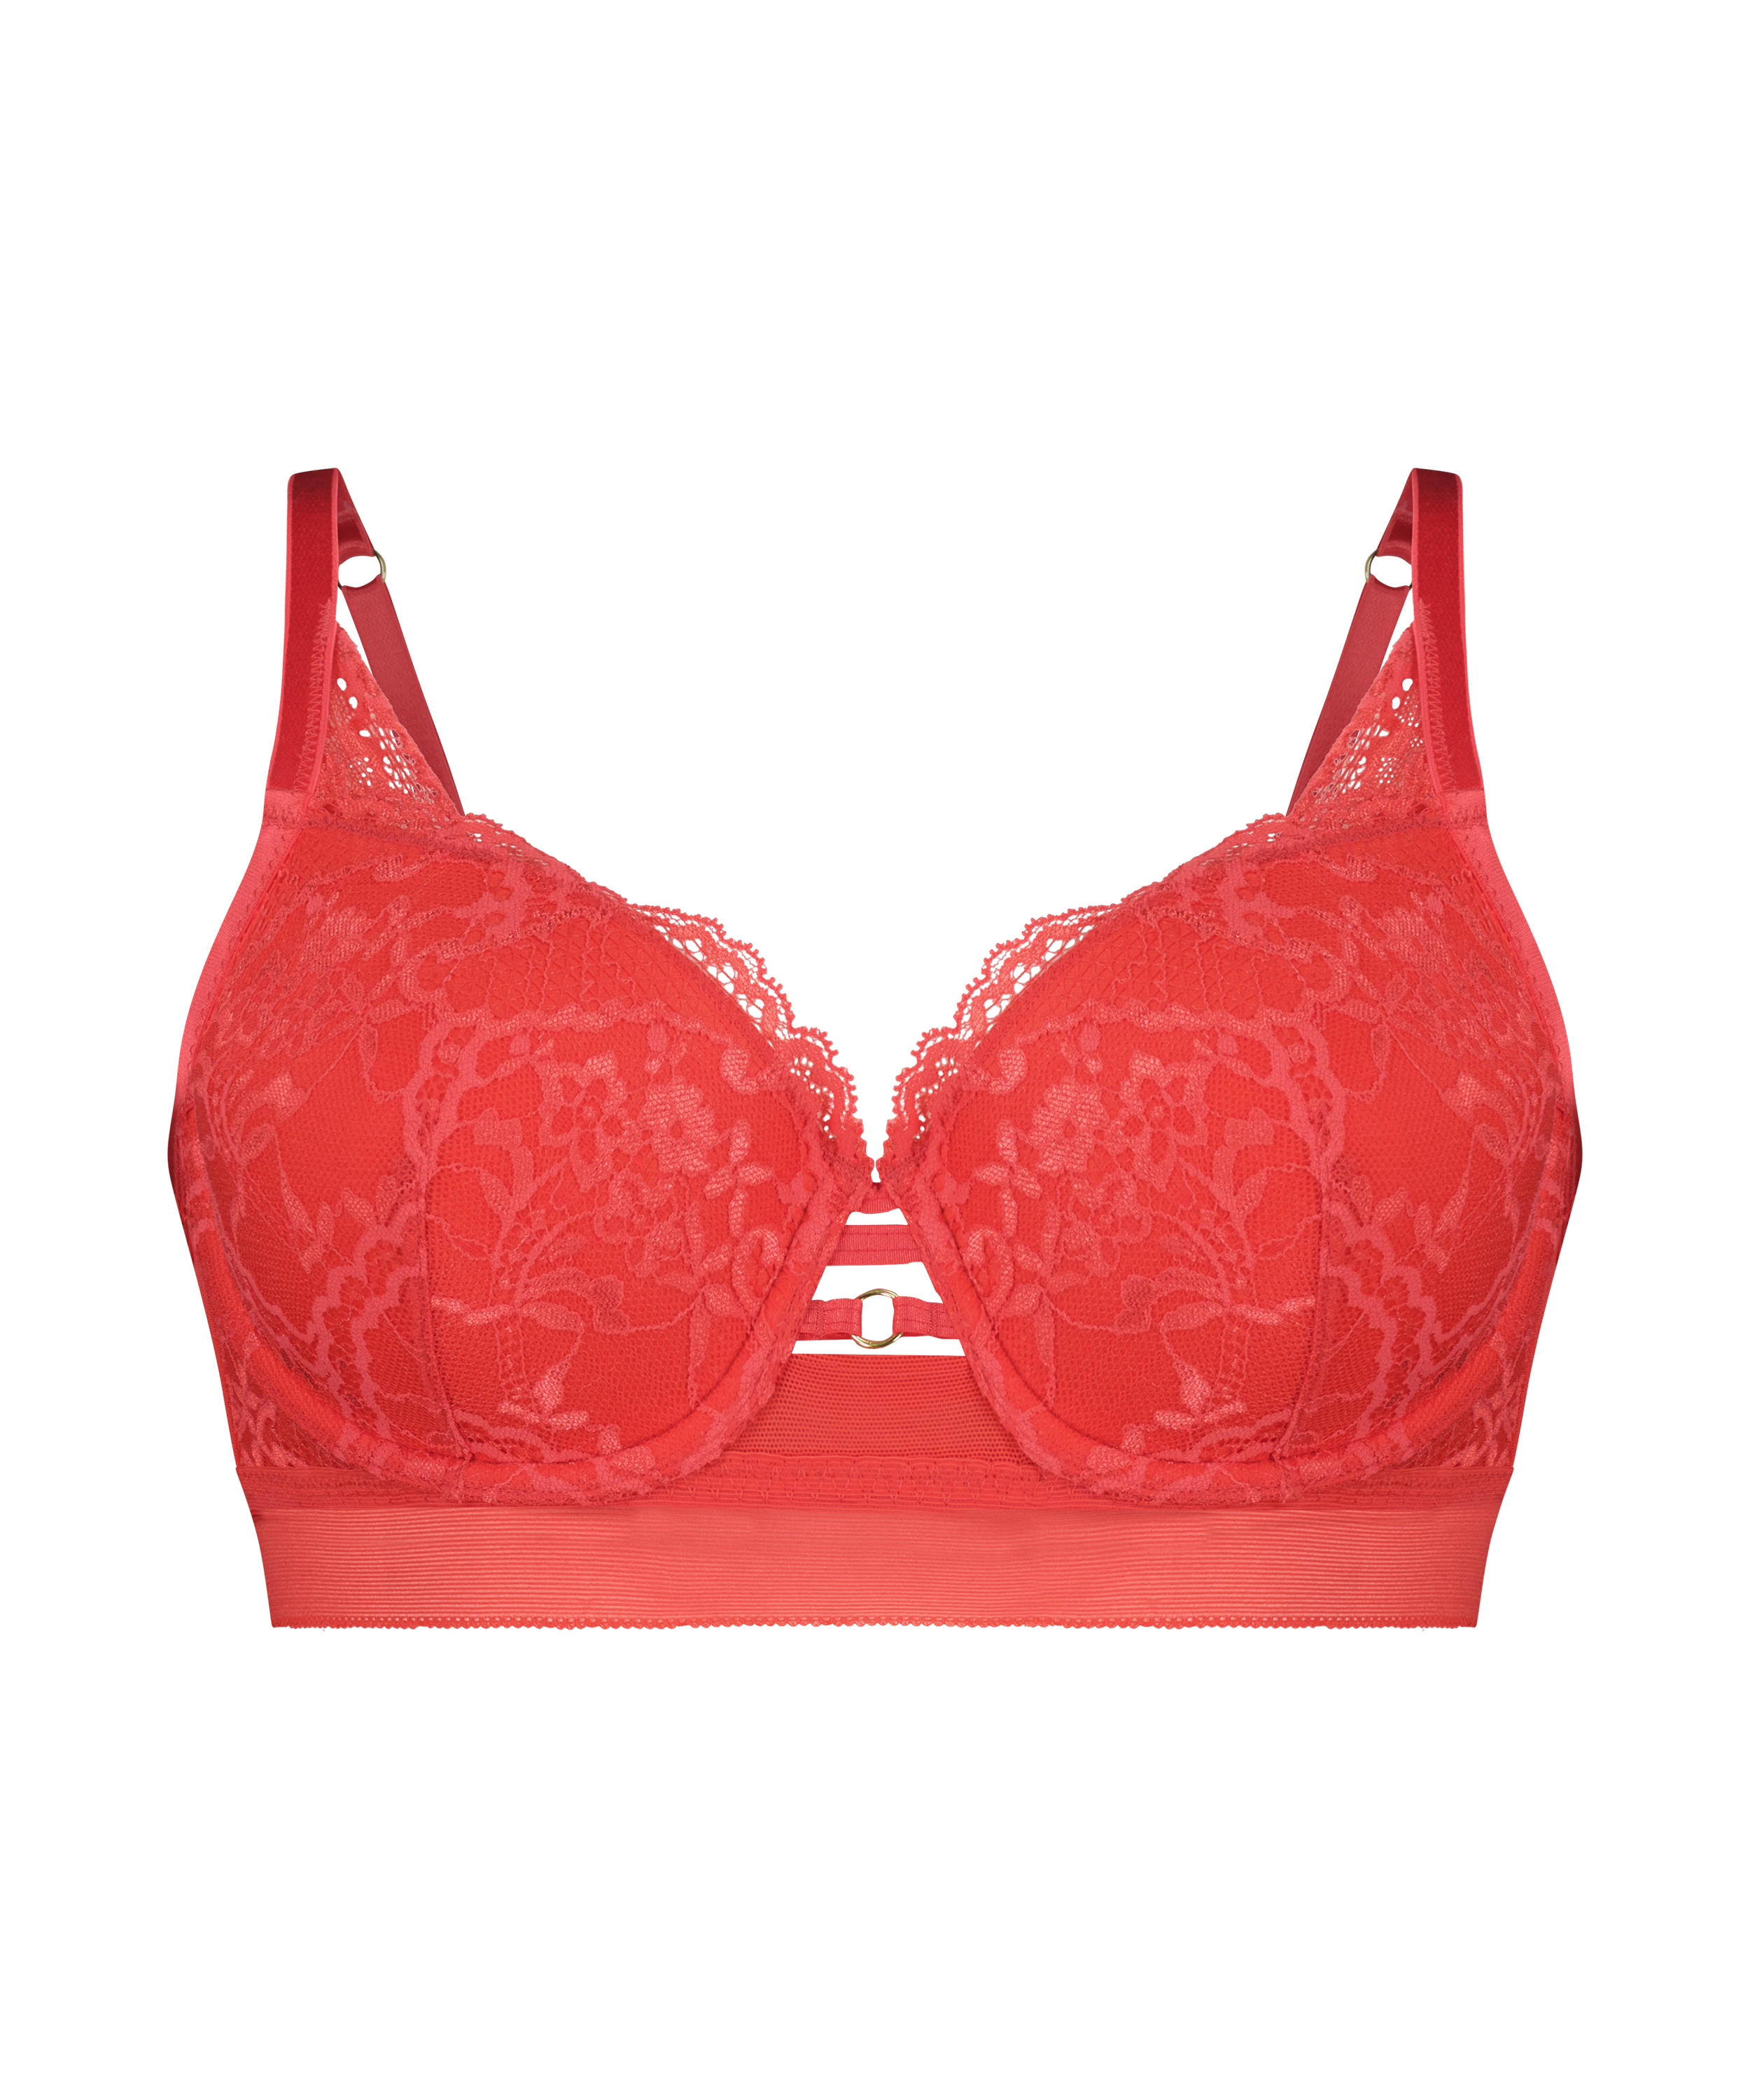 Voorgevormde beugel bh Chione, Rood, main